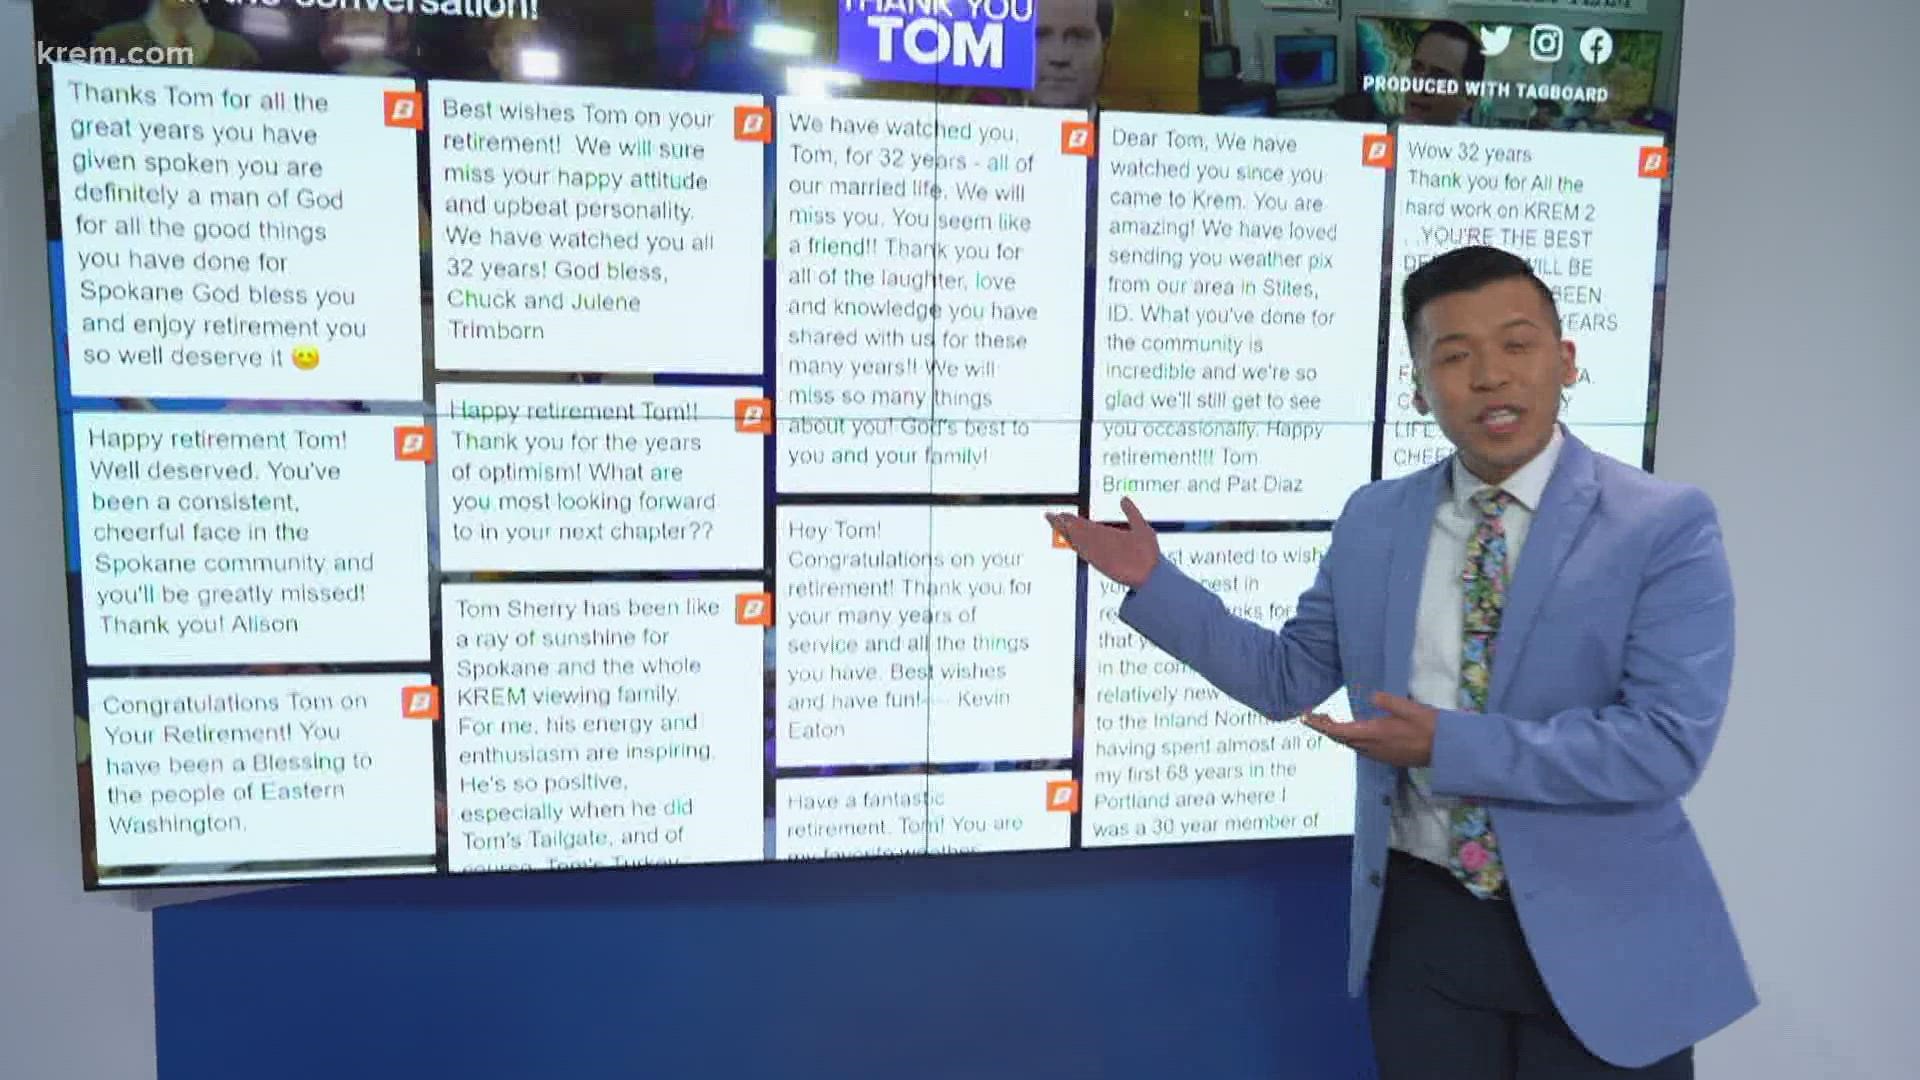 KREM 2's Tim Pham looks over the mountain of well wishes pouring in from viewers on Tom Sherry's last day.